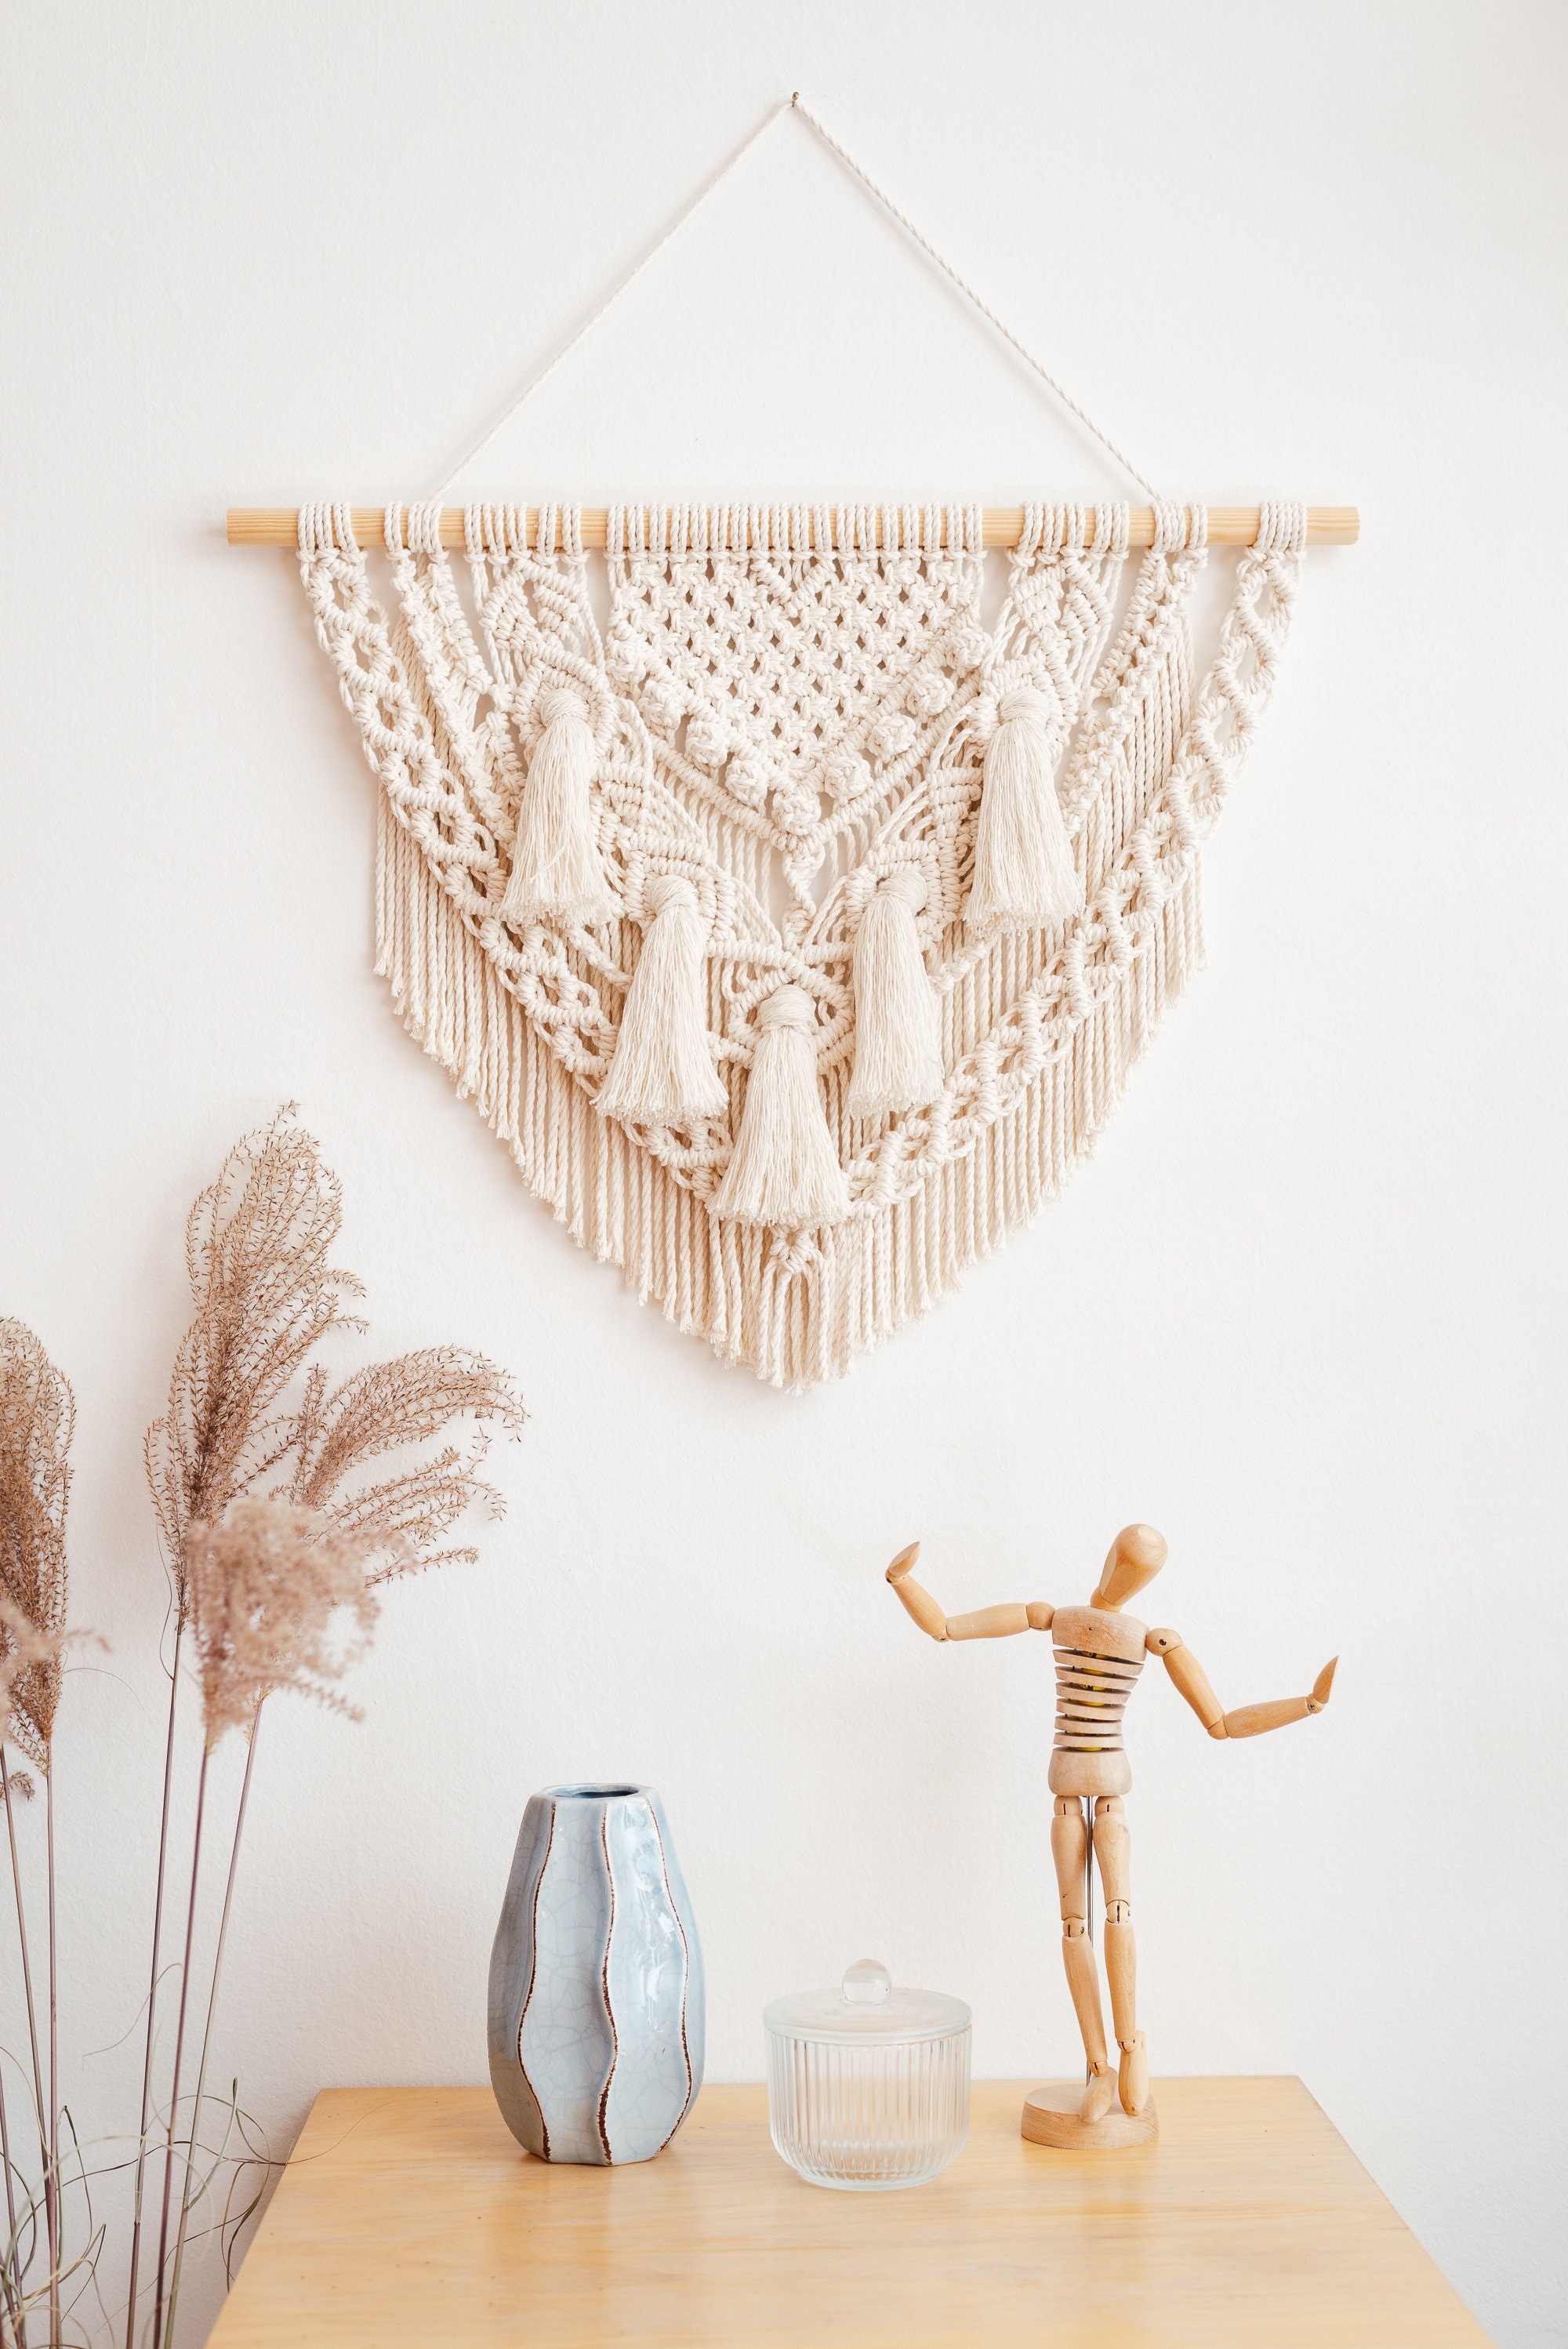 Macrame wall hangings – Worry Knot Goods